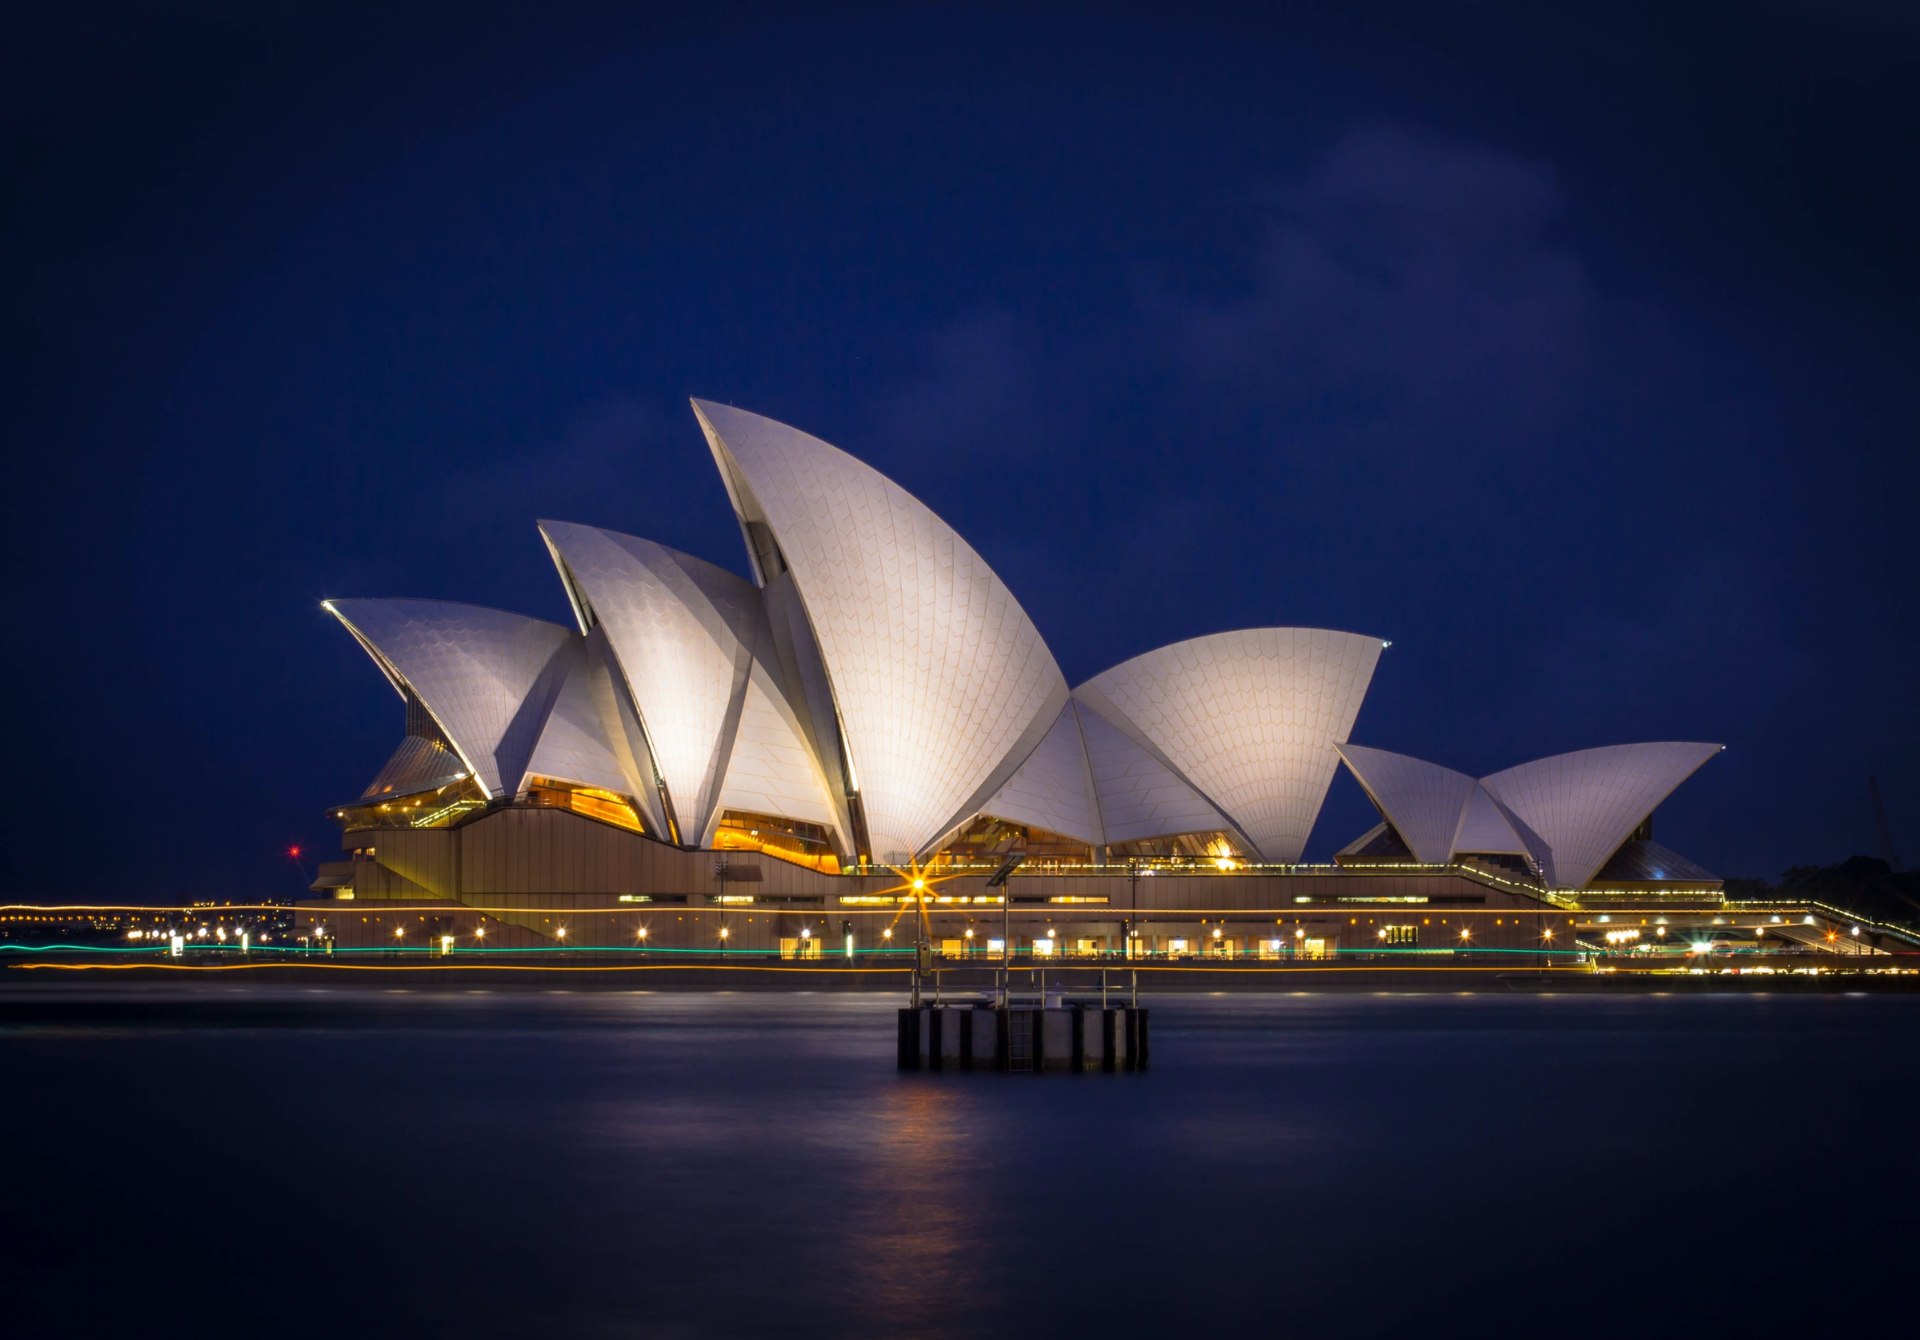 Sydney Opera House: some interesting facts about its architecture